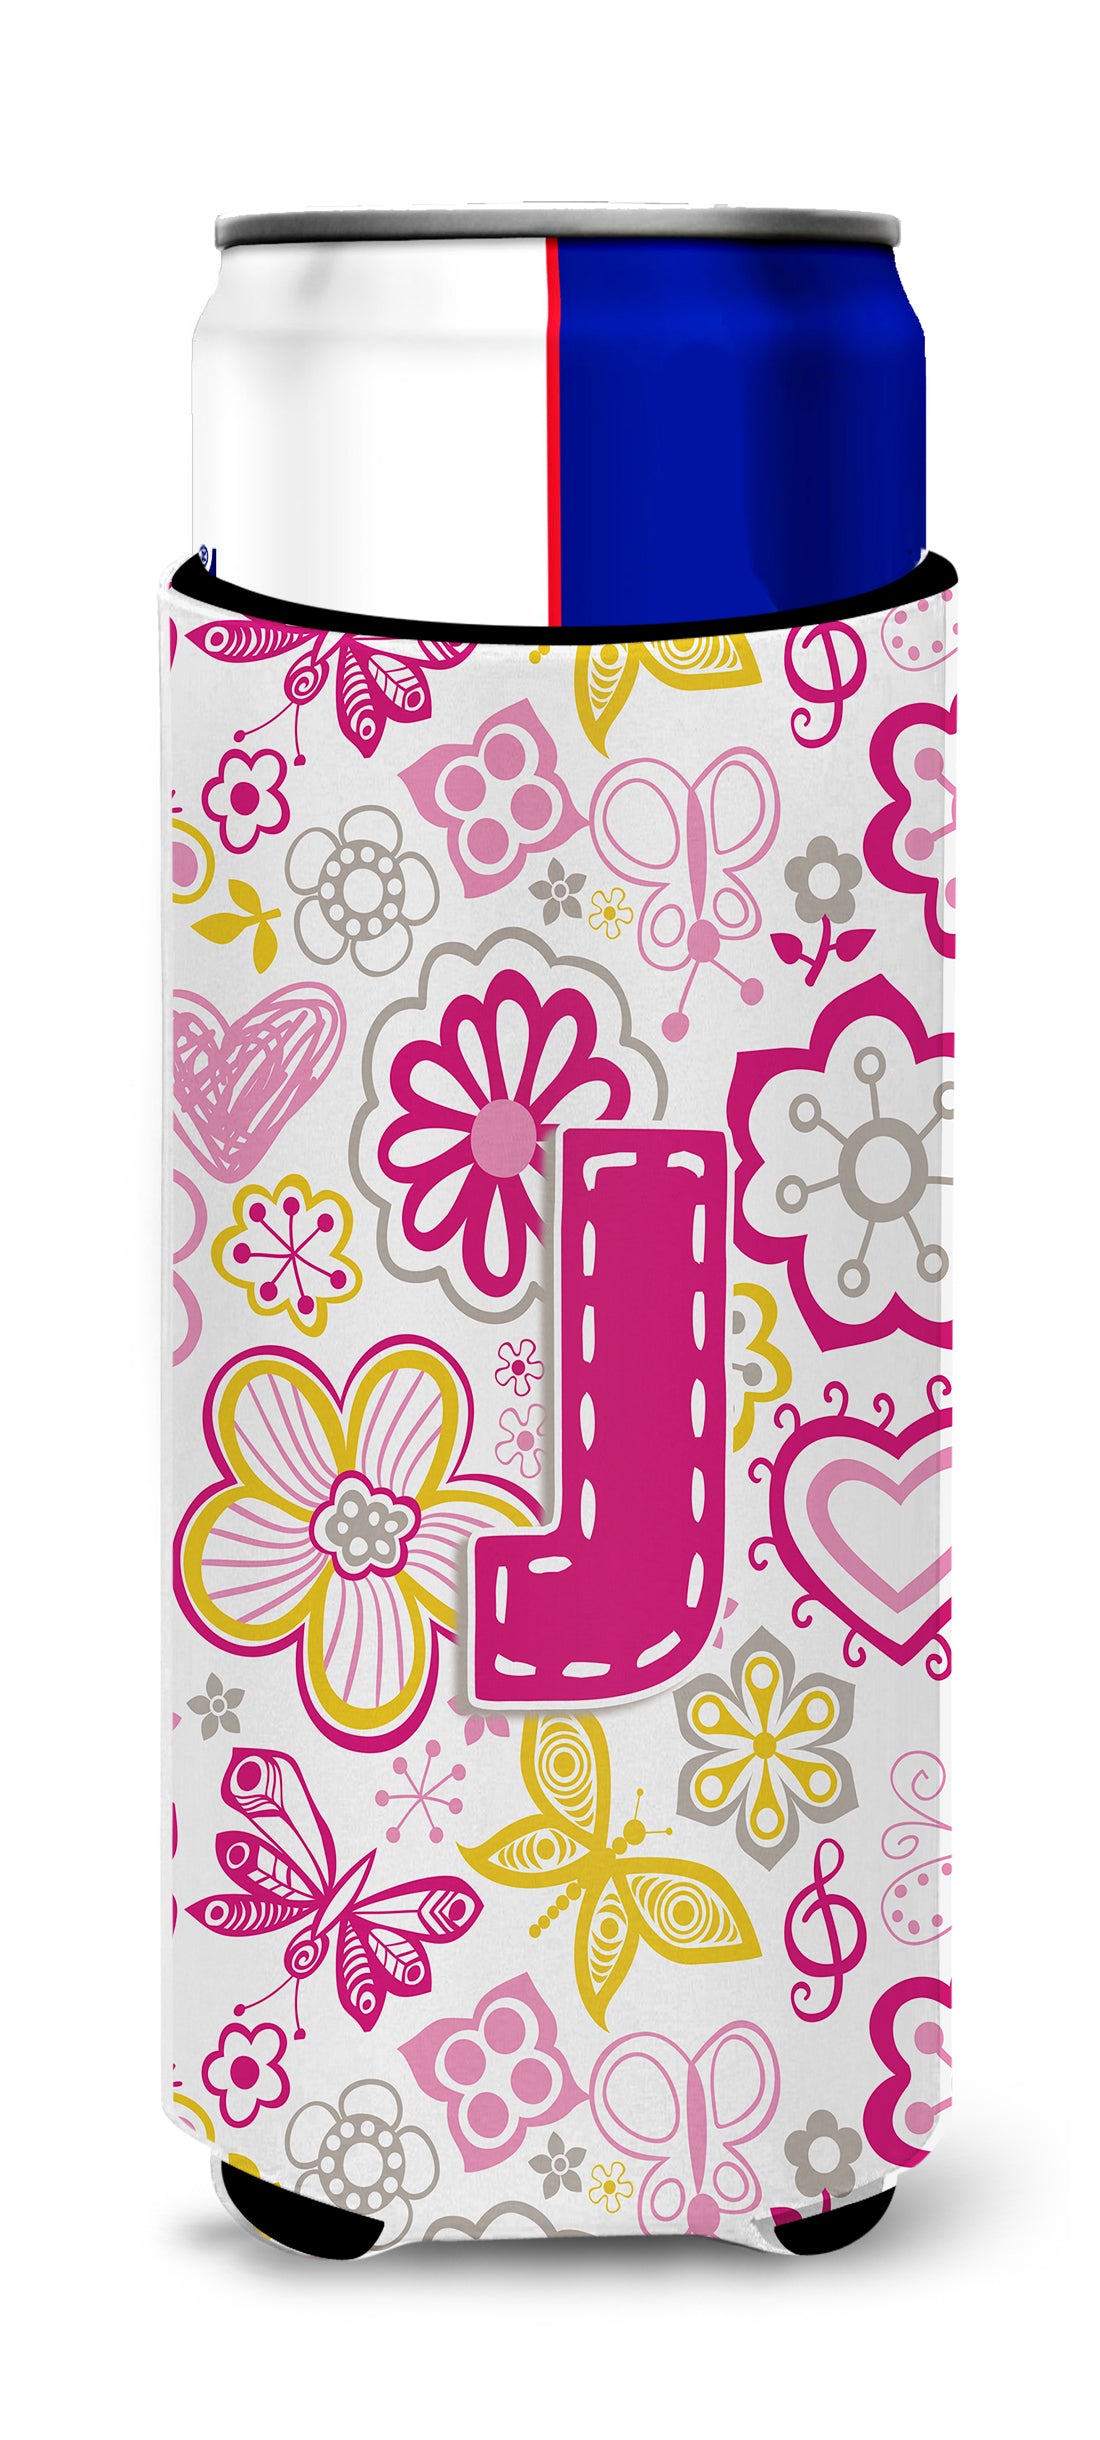 Letter J Flowers and Butterflies Pink Ultra Beverage Insulators for slim cans CJ2005-JMUK.